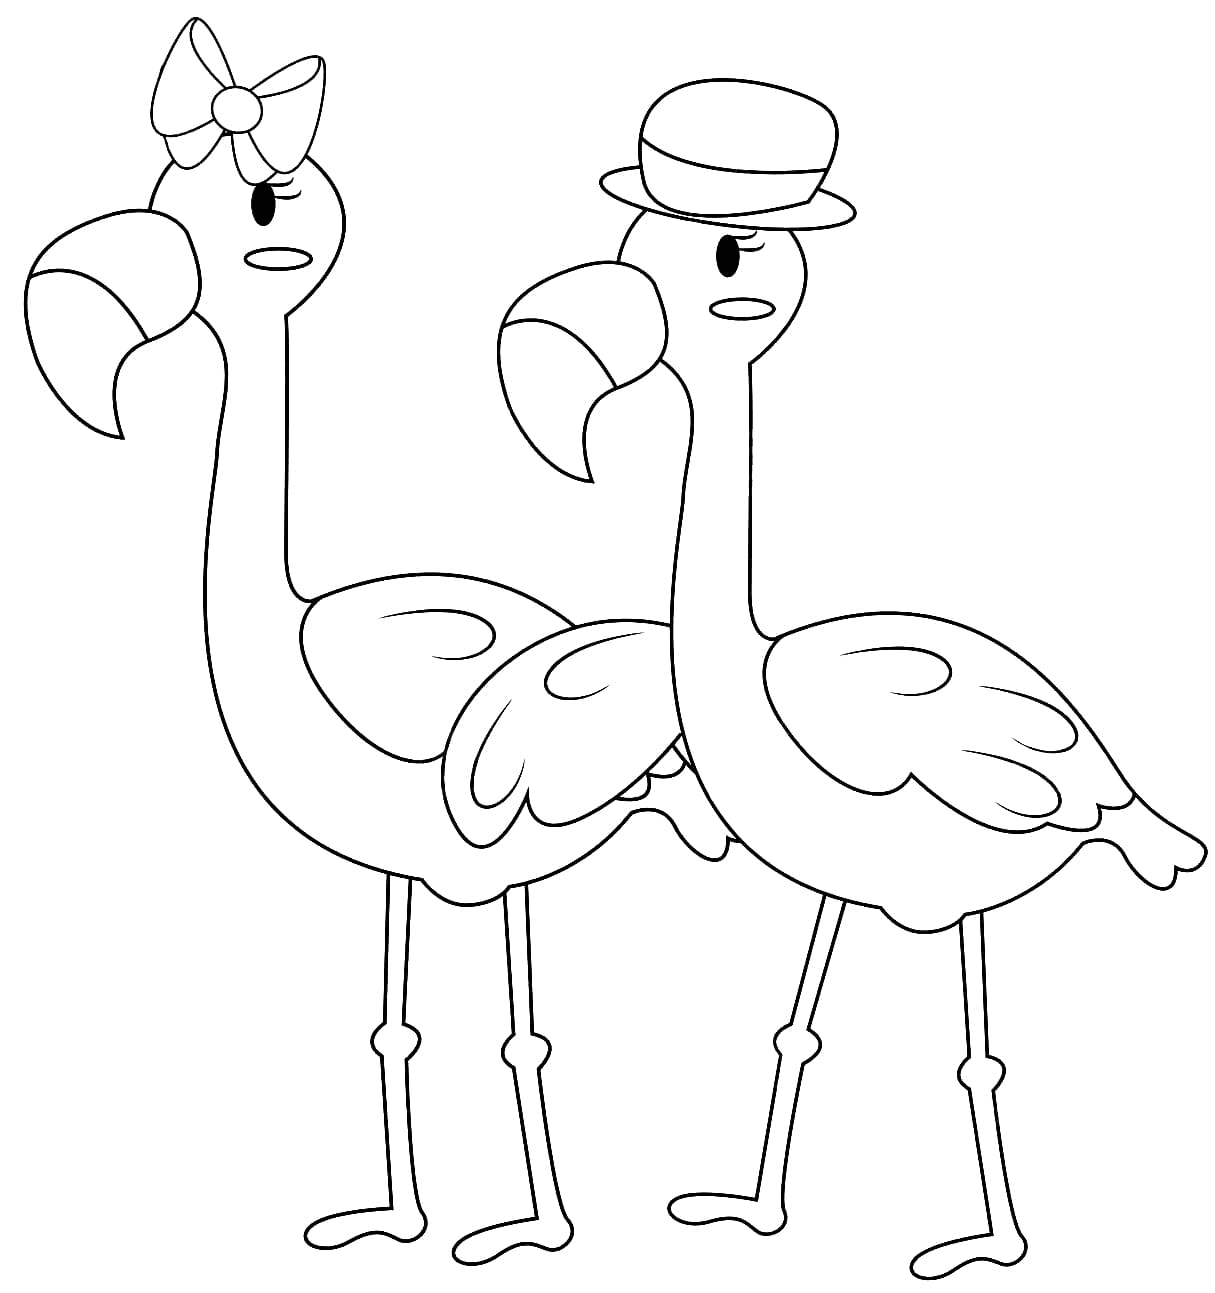 Mr Flamingo and Mrs Flamingo Coloring Page